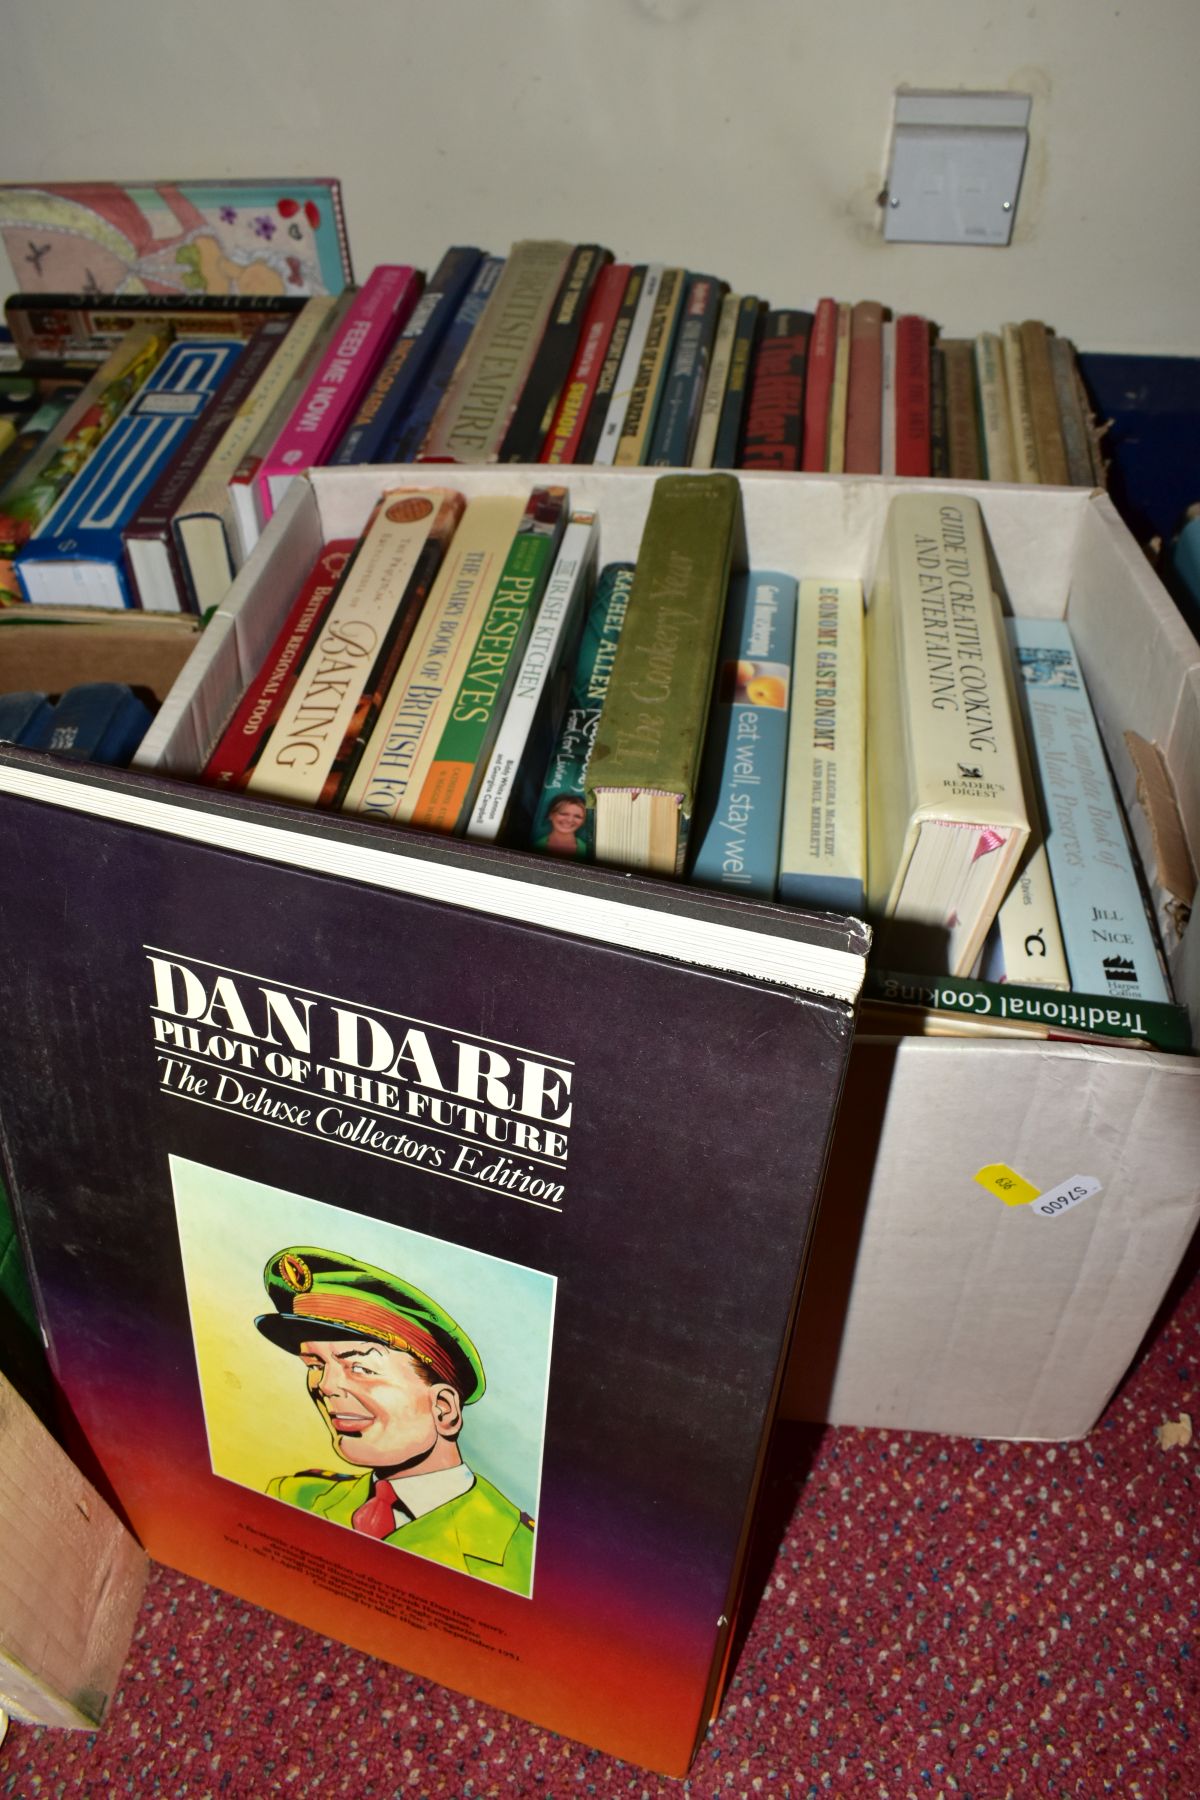 SEVEN BOXES OF BOOKS ETC, subjects include cookery - James Martin, River Cottage, Vefa's Cottage, - Image 8 of 10